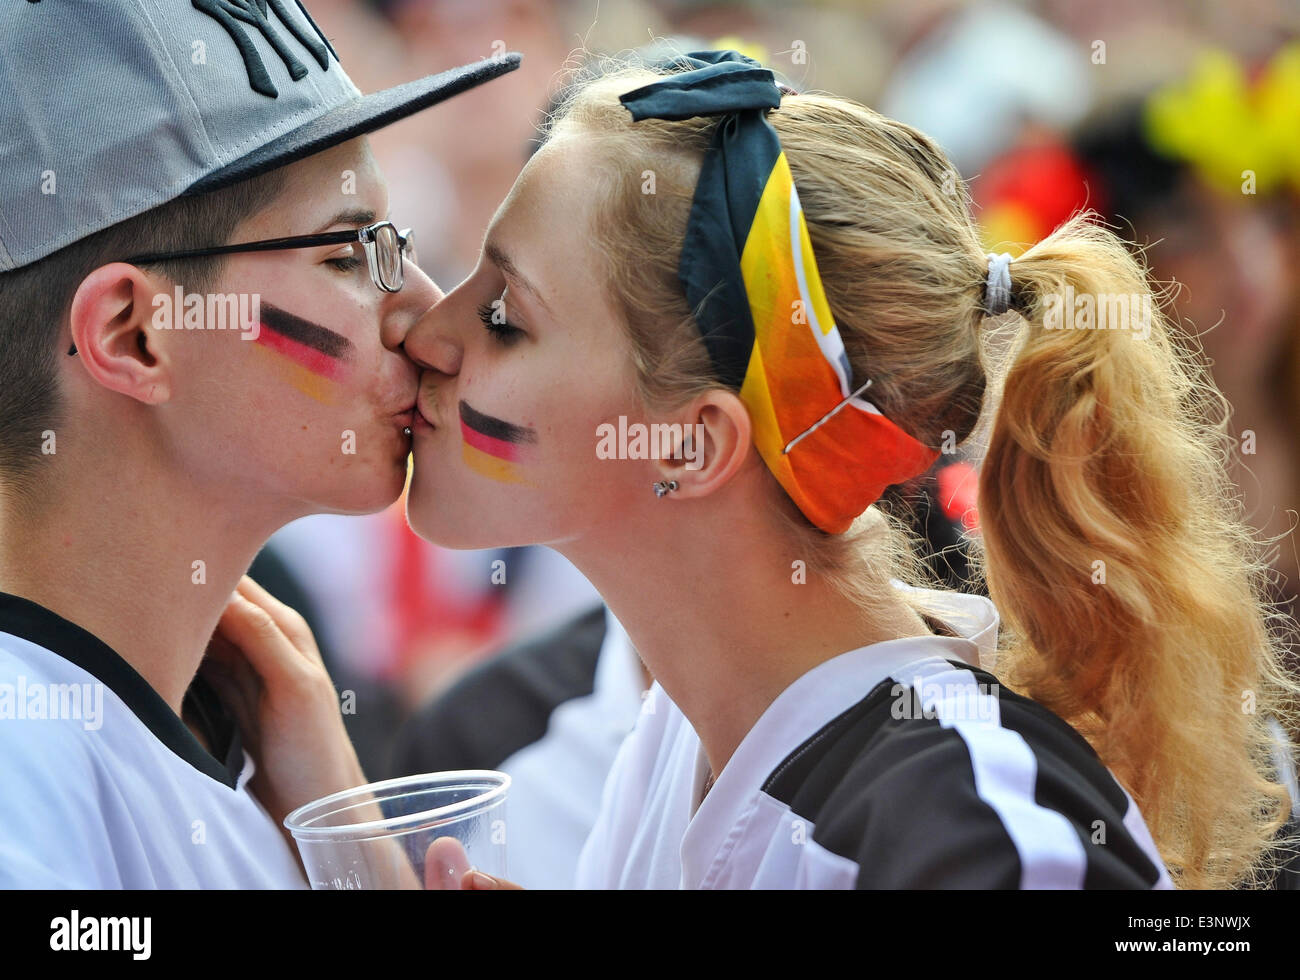 Fans kiss at the public screening of the FIFA World Cup 2014 match between  Germany and